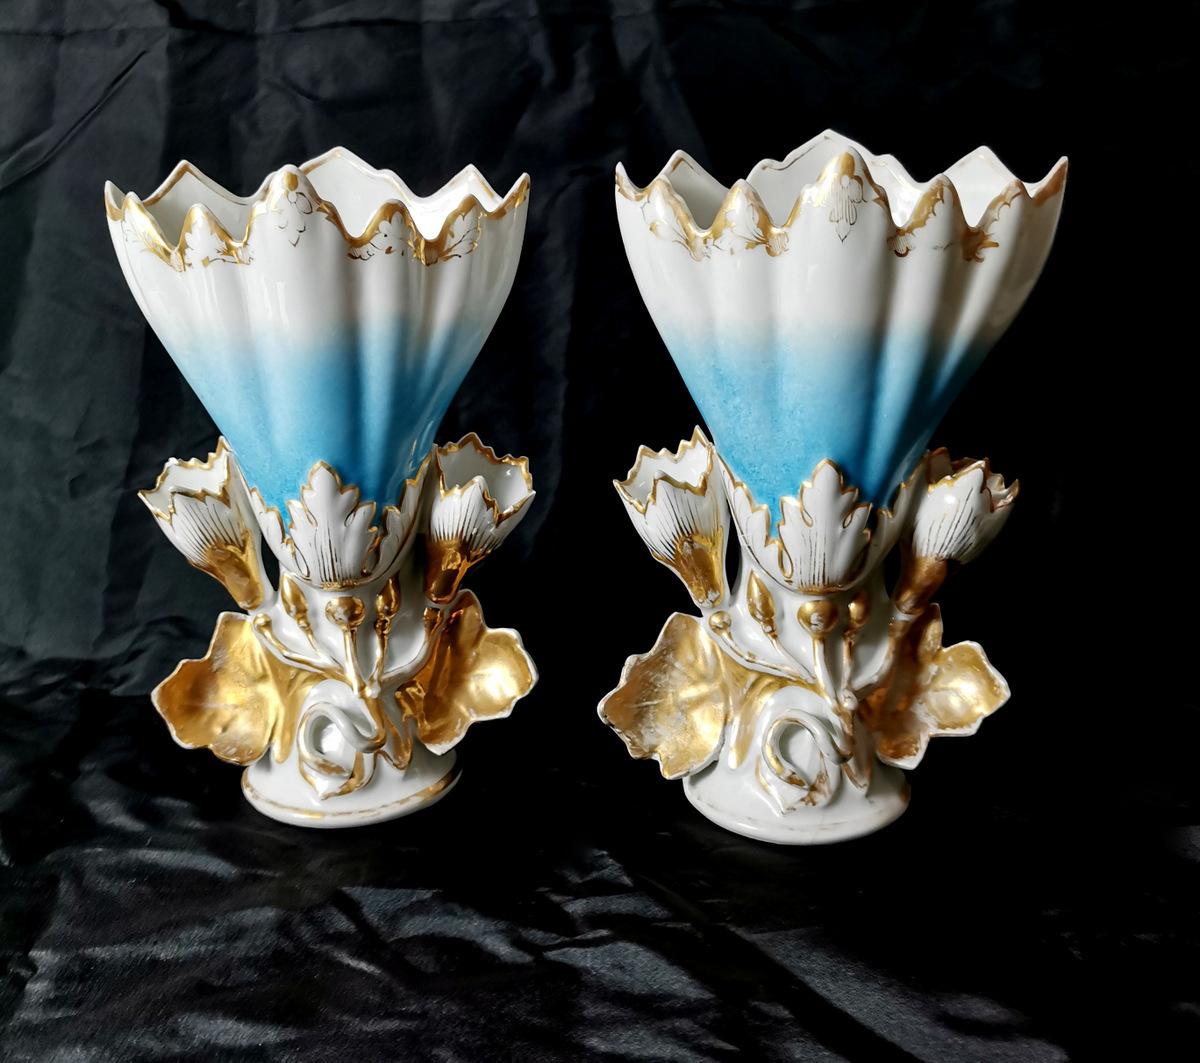 We kindly suggest you read the whole description, because with it we try to give you detailed technical and historical information to guarantee the authenticity of our objects.
Lovely and romantic French wedding vases in white porcelain; the upper